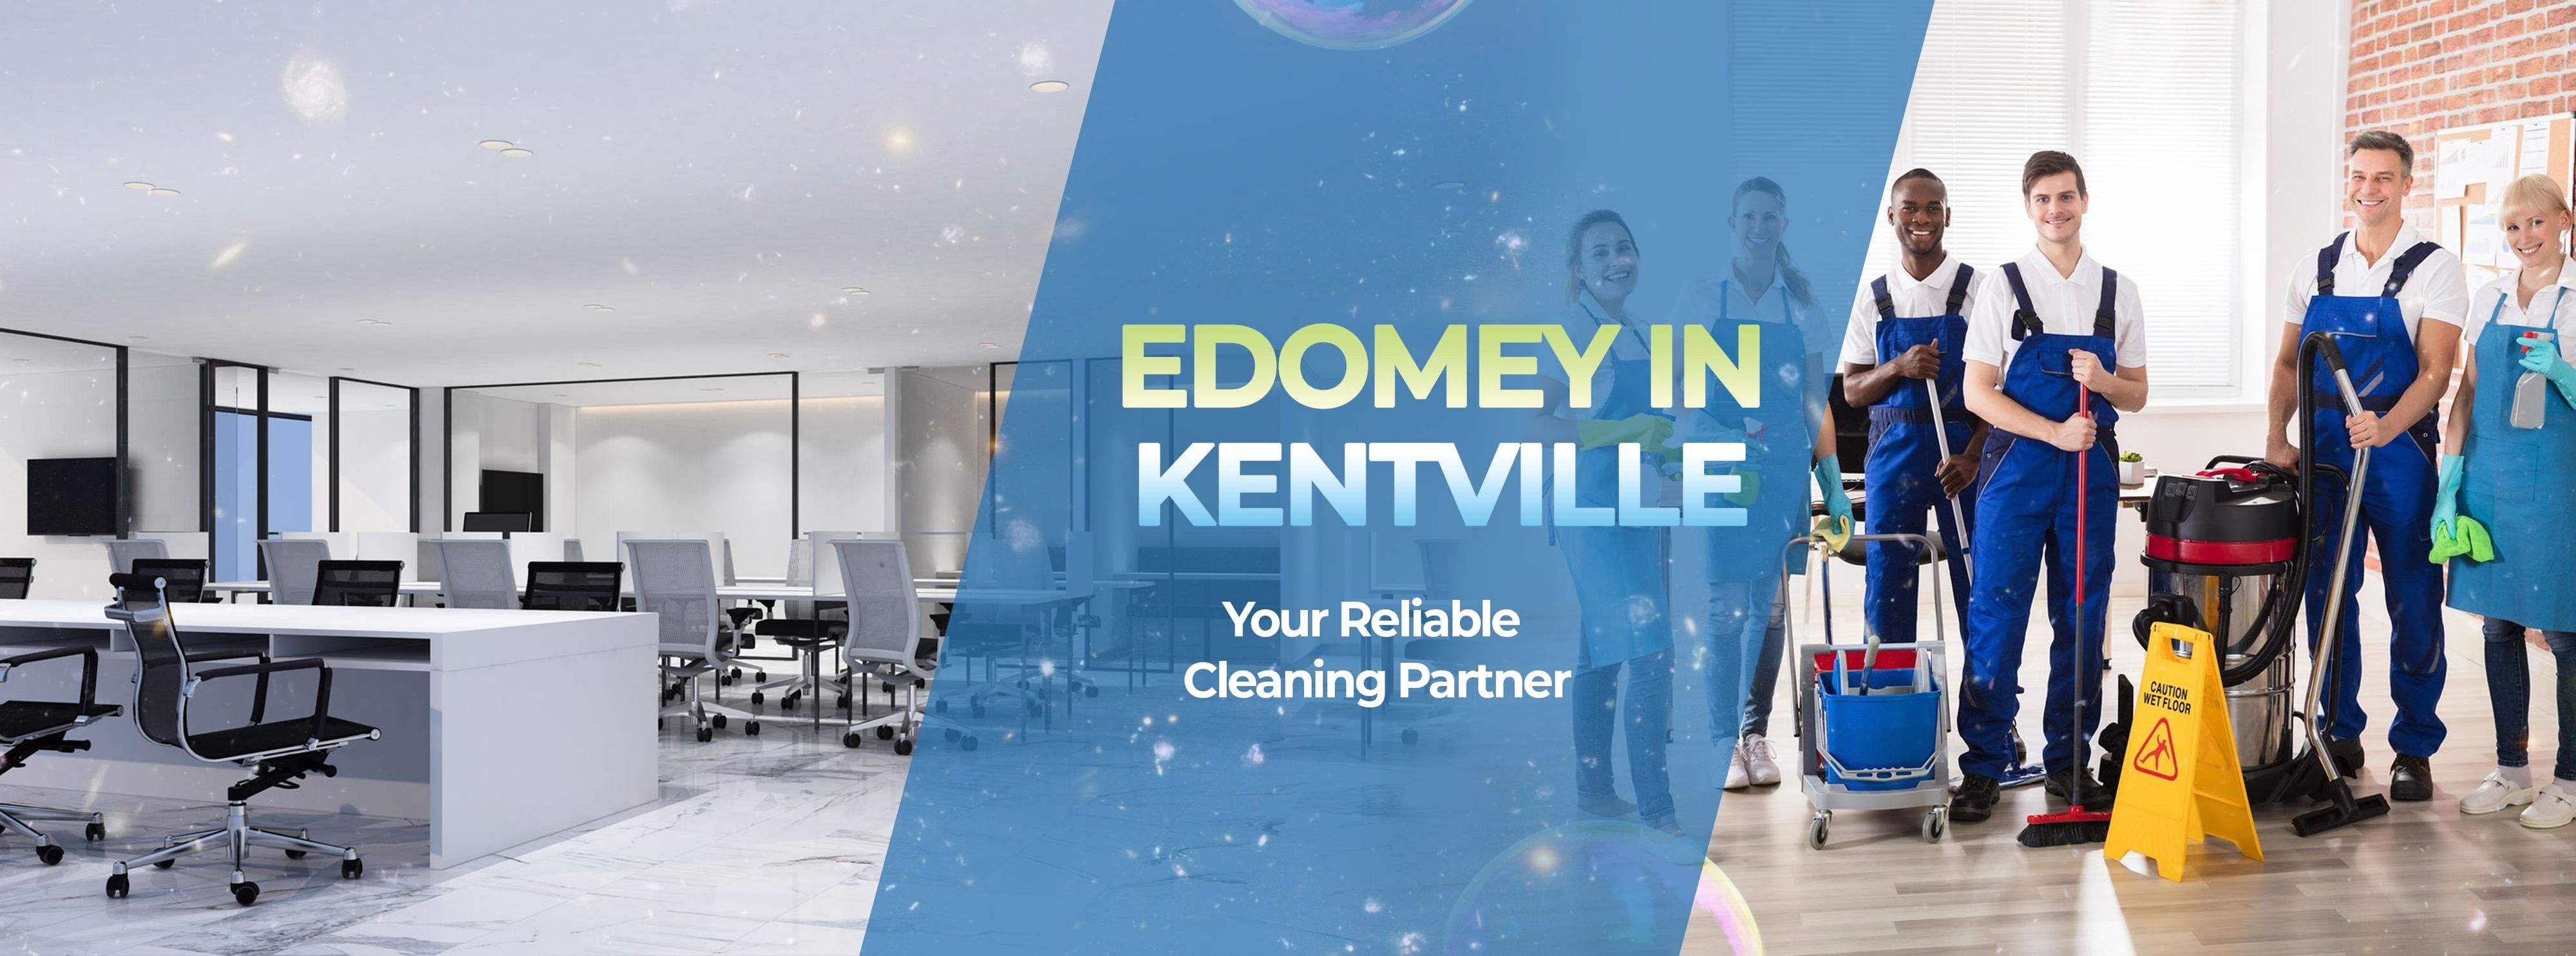 affordable Commercial Cleaning Services in Kentville